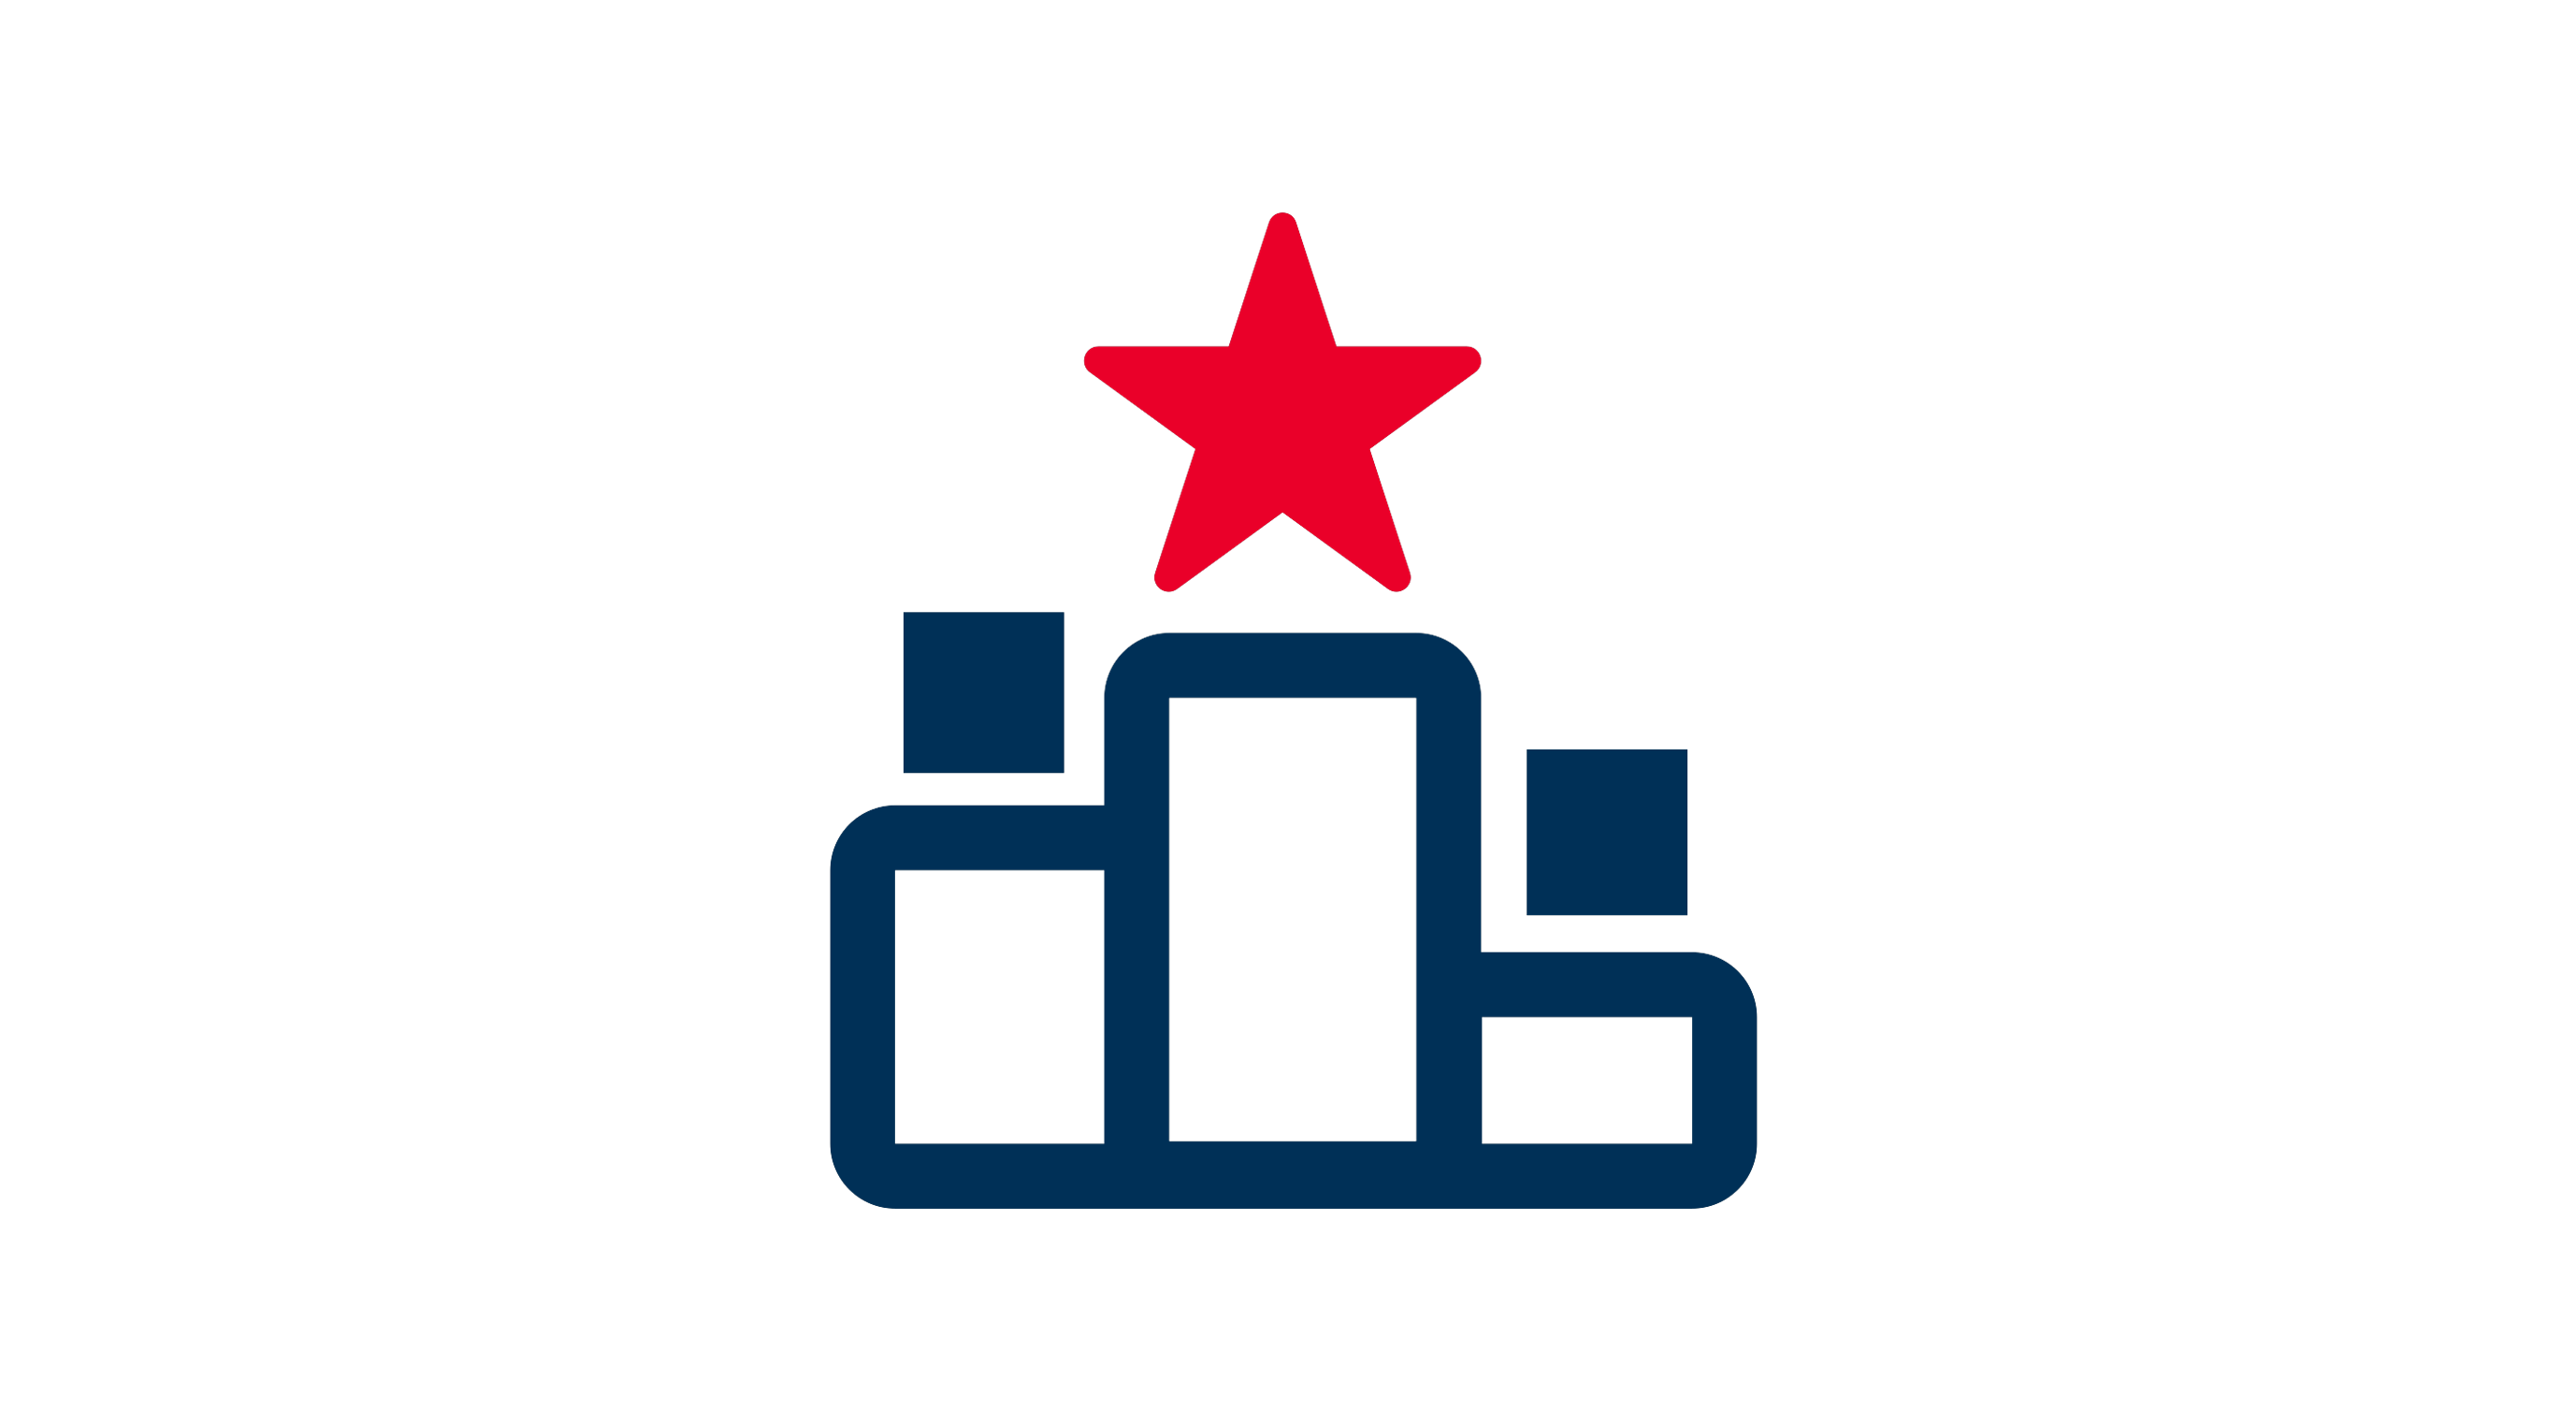 Icon of a red star in first place position with blue squares in the second and third place positions